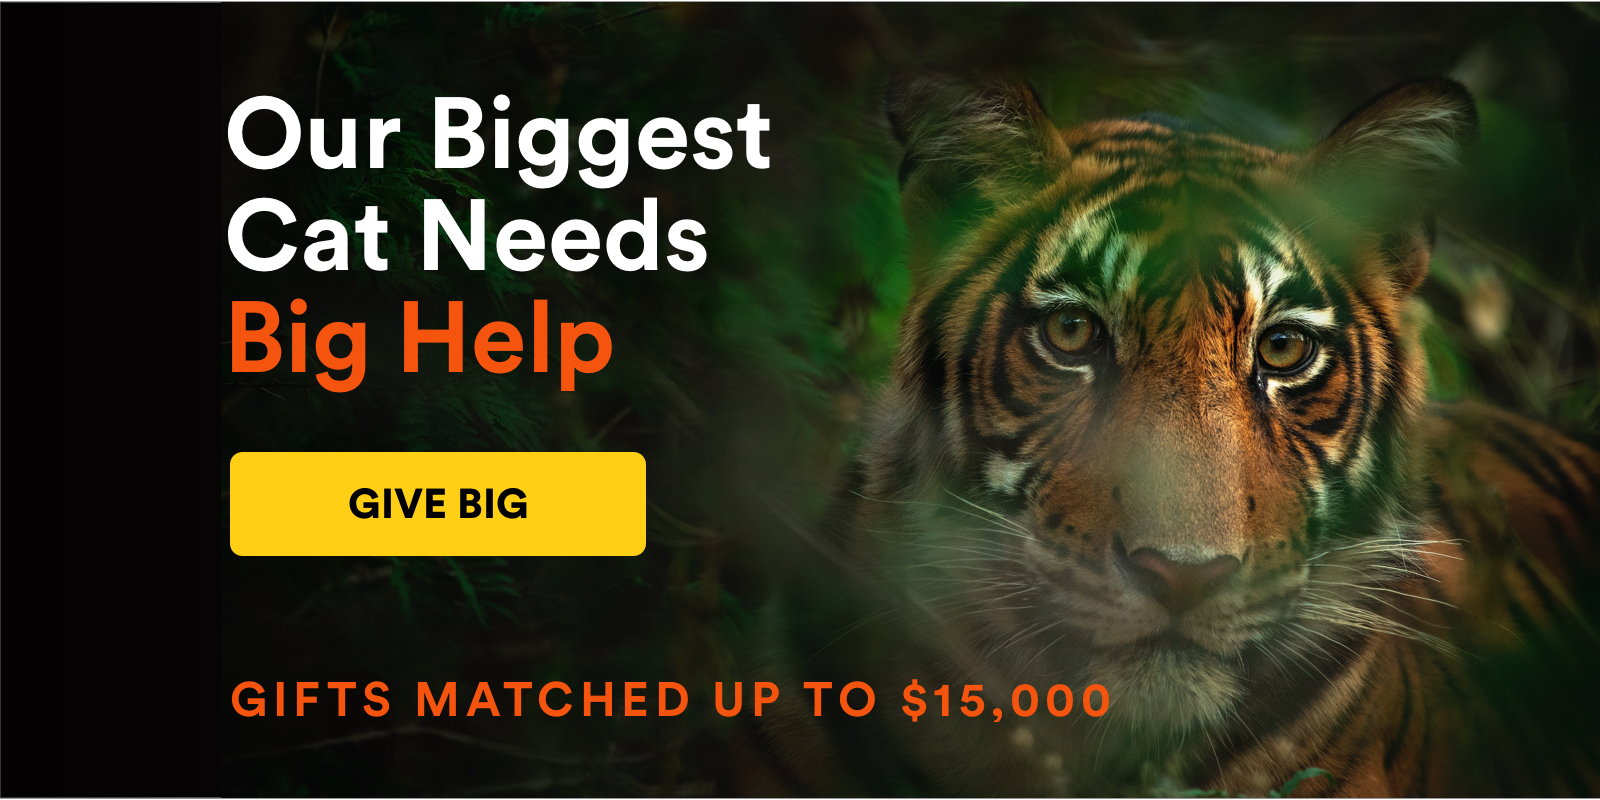 Our biggest cat needs big help: Give Big. Gifts matched up to $15,000.